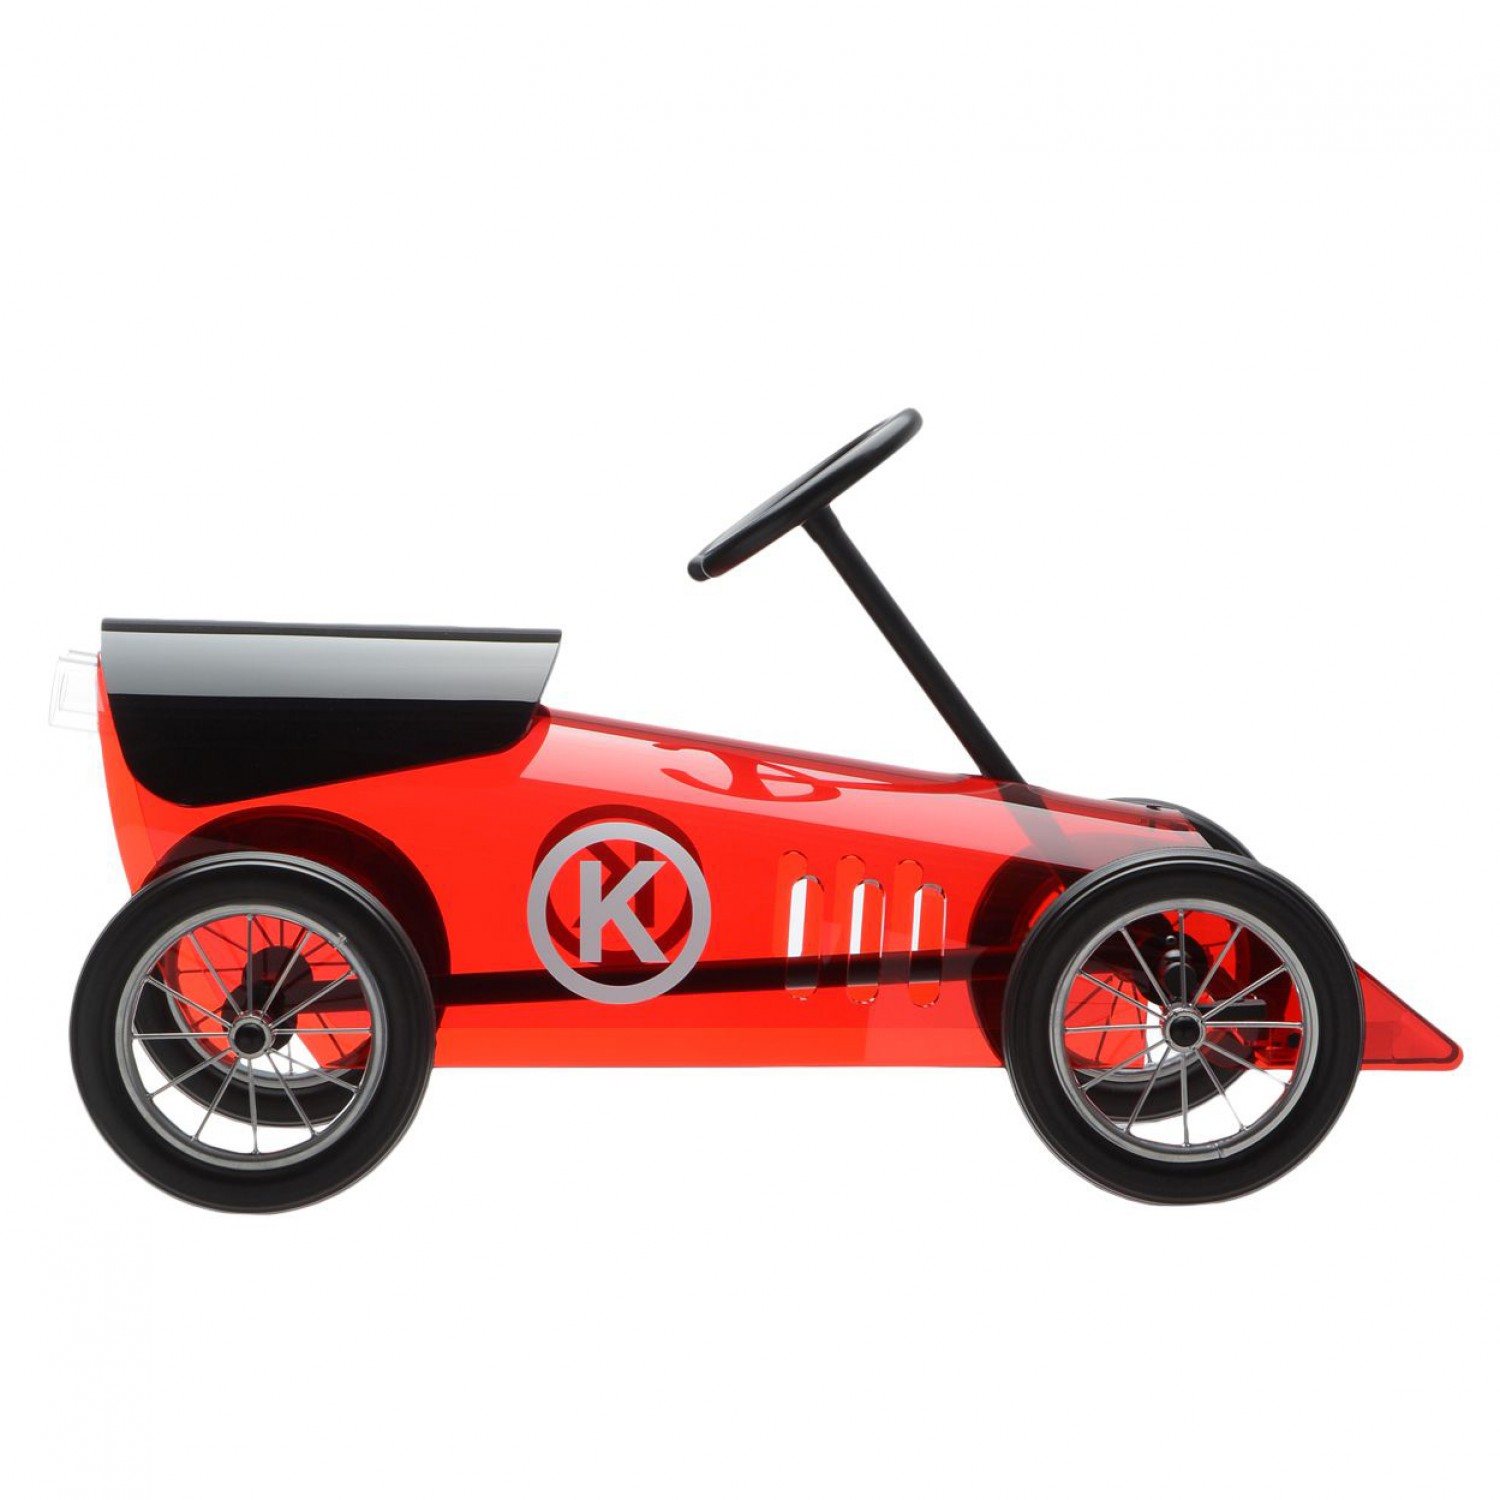 Kartell Discovolante Toy Car, Buy Online Today | Utility Design UK